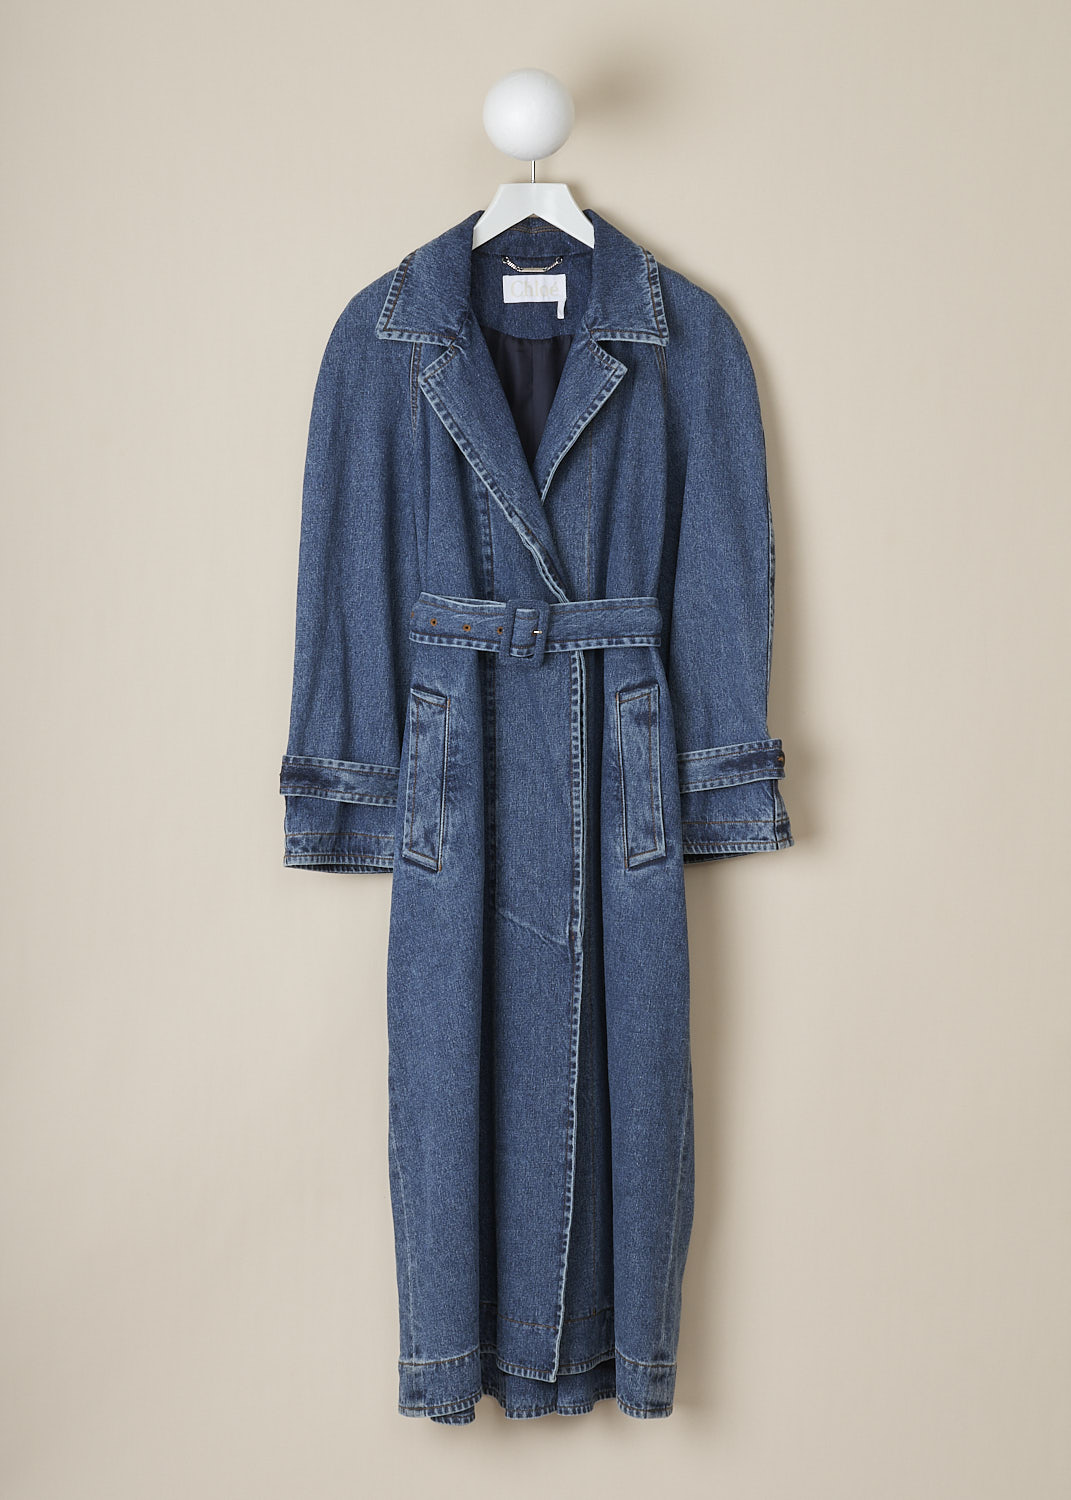 CHLOÃ‰, LONG DUSKY BLUE DENIM COAT, CHC23SDM2716740X_DUSKY_BLUE, Blue, Front, This long dusky blue denim trench coat has a notched lapel. The coat has a concealed front button closure and a matching fabric belt to cinch in the waist. The long sleeves have sleeve straps. The coat has slanted pockets. In the back, the coat has a centre kick pleat.

